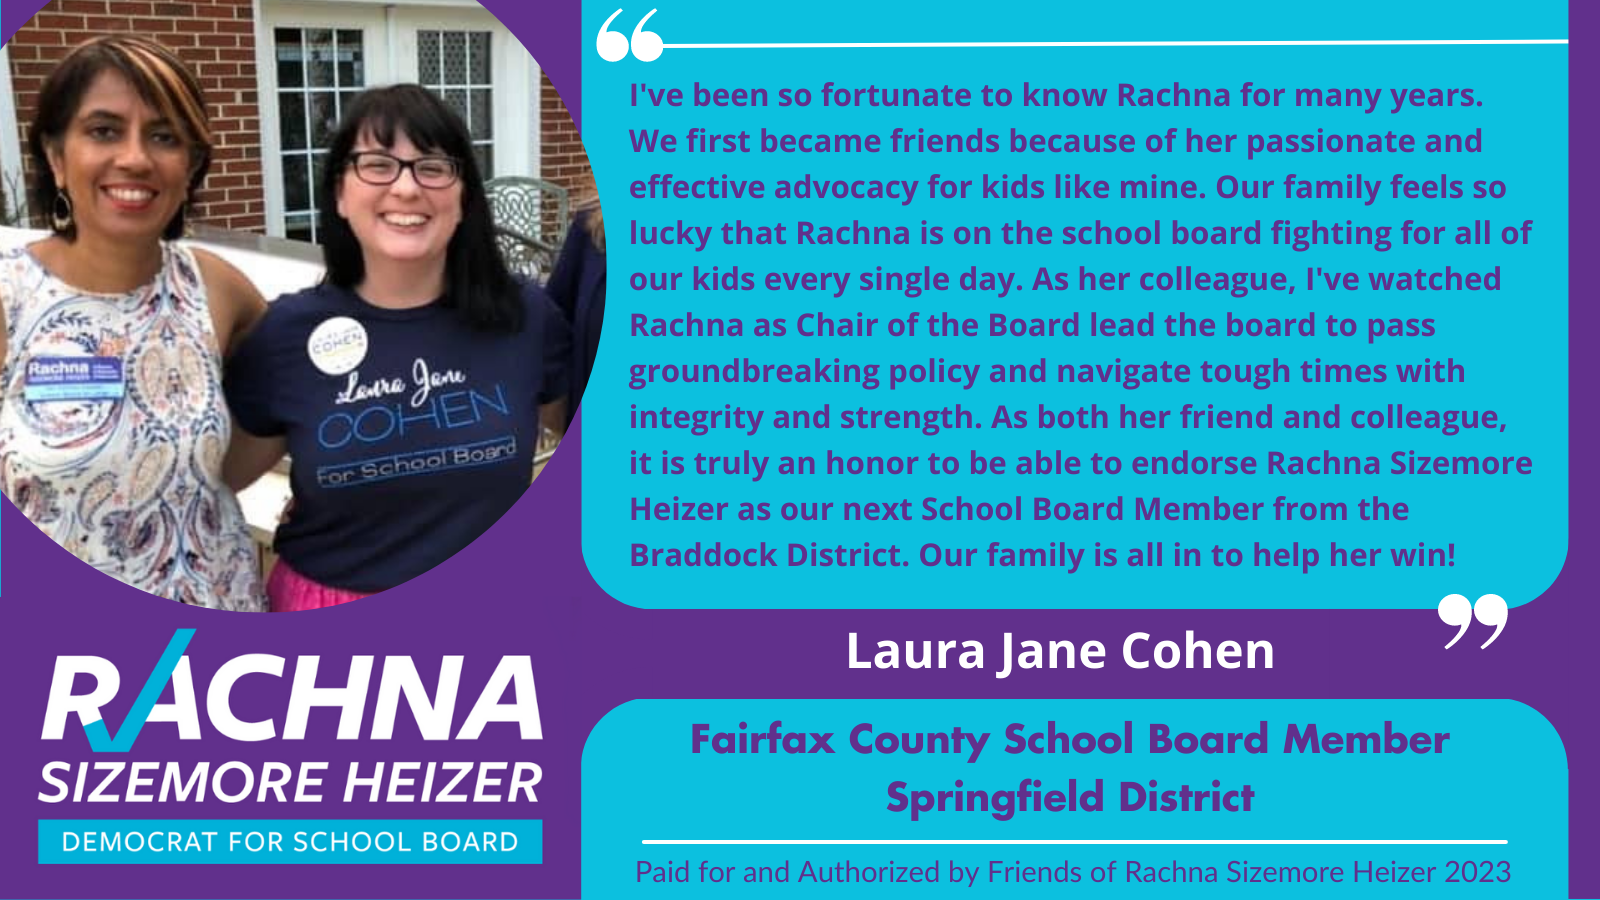  Endorsement from Fairfax County School Board Member Springfield District Laura Jane Cohen. Endorsement is “I’ve been fortunate to know Rachna for many years. We first became friends because of her passionate and effective advocacy for kids like mine